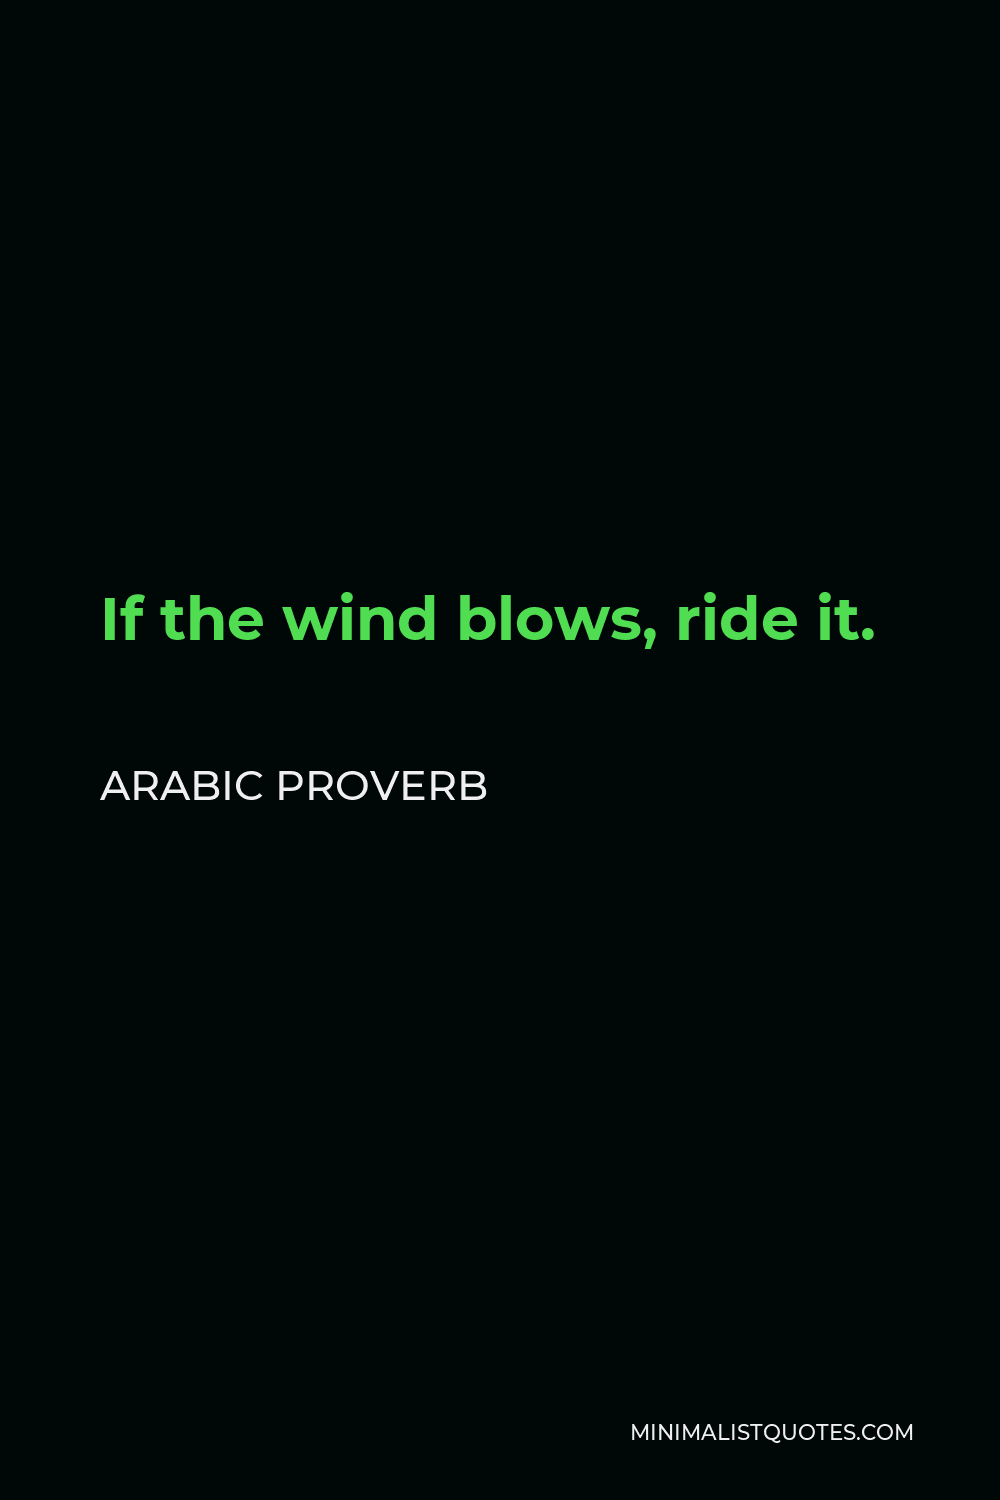 Arabic Proverb Quote - If the wind blows, ride it.